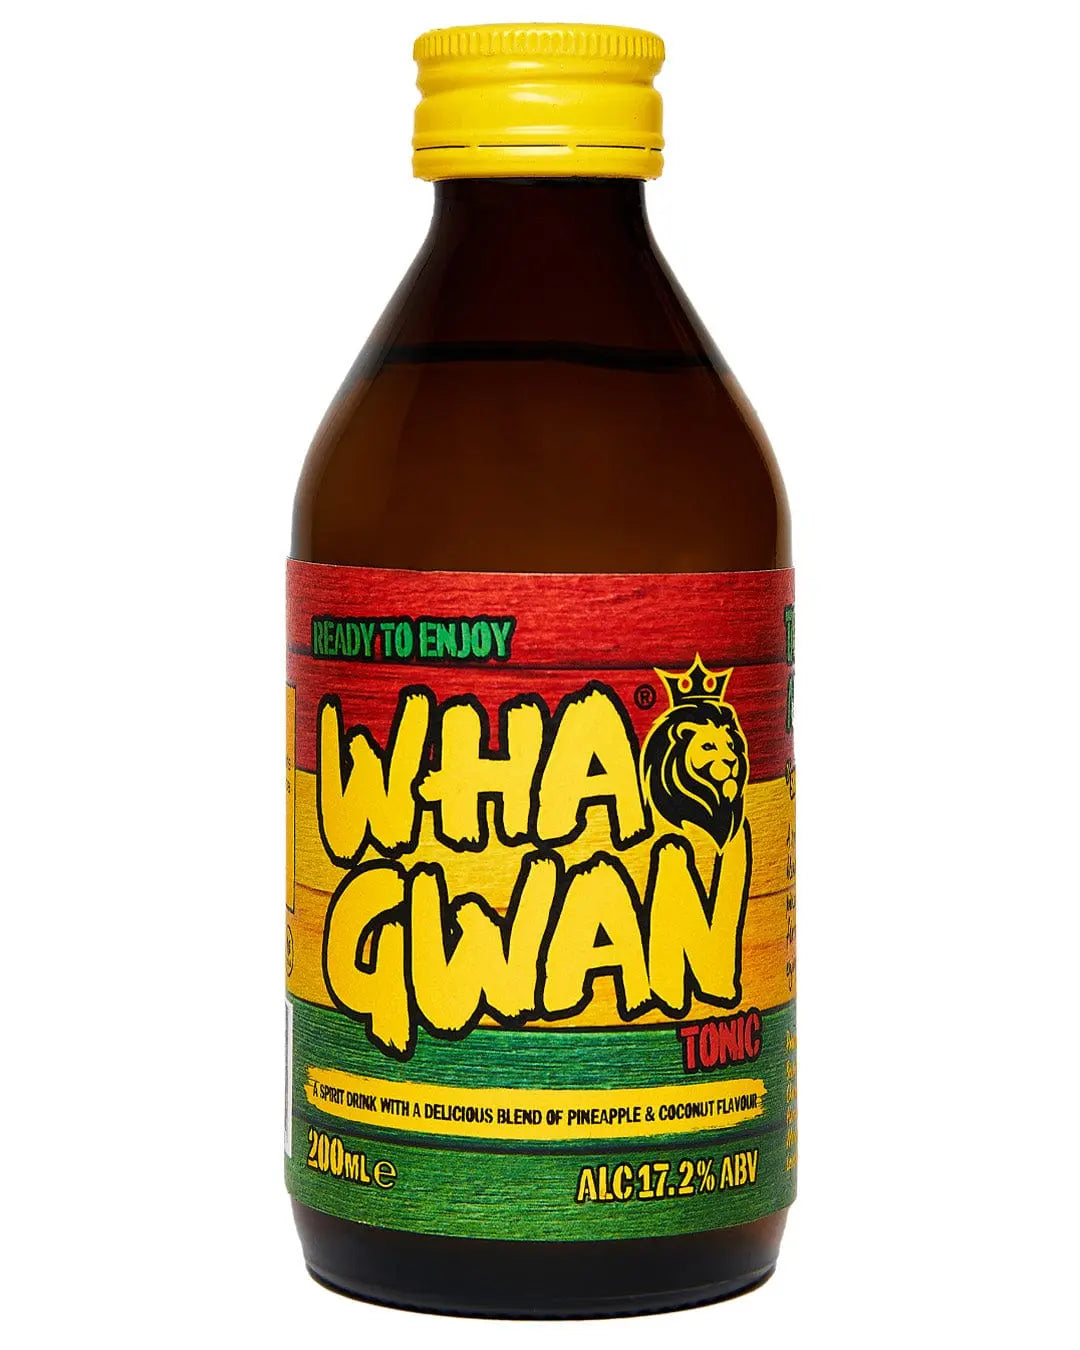 Wha Gwan Pineapple Coconut Rum Tonic, 200 ml Fortified & Other Wines